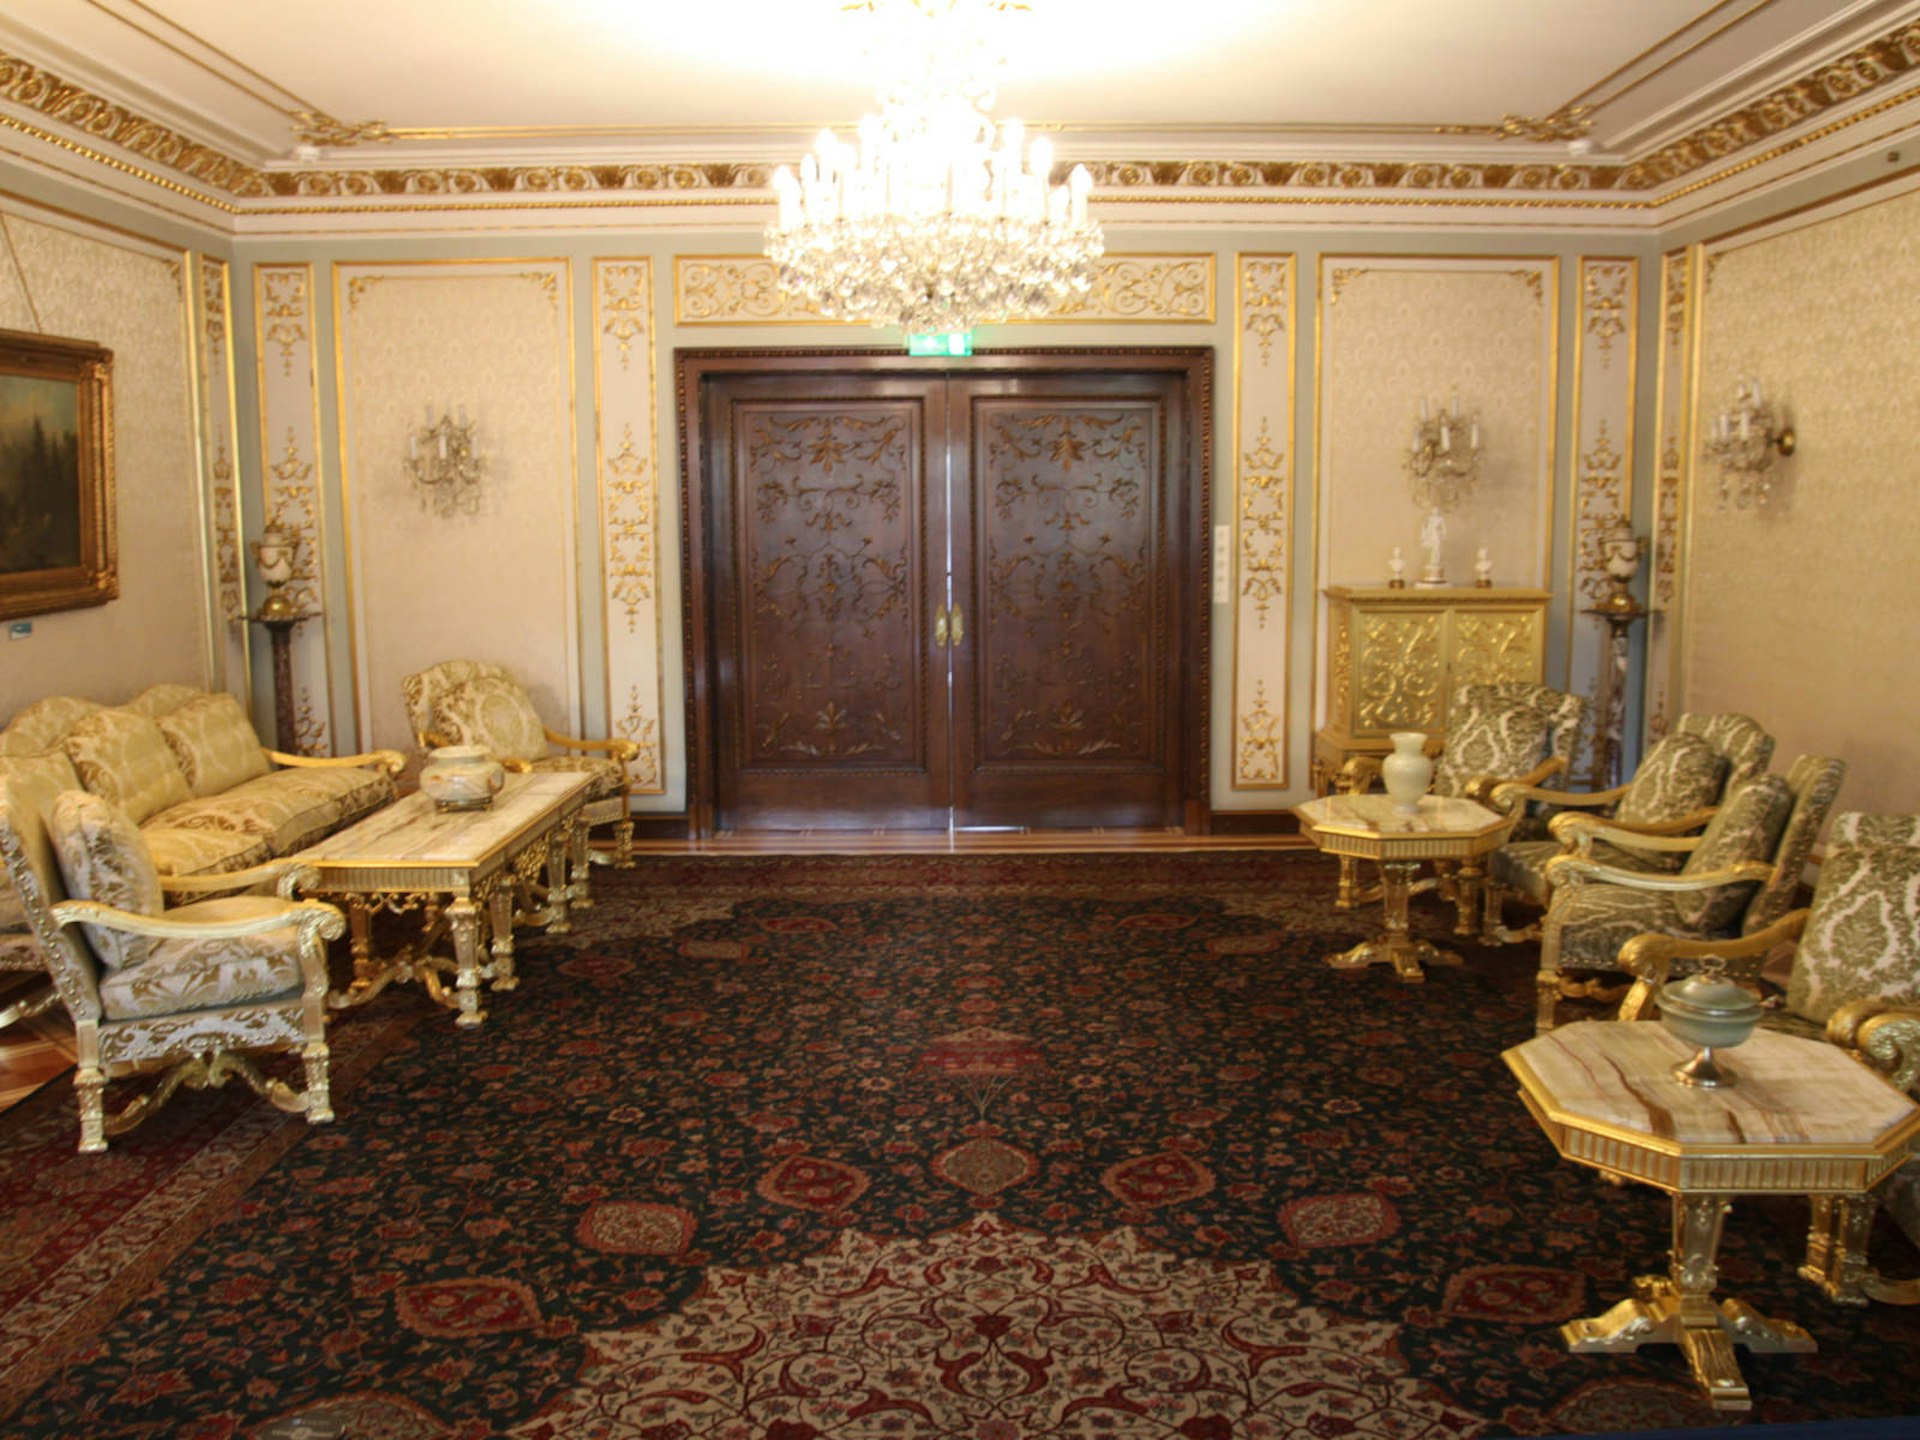 Private quarters of Romania's former first family © Kit Gillet / Lonely Planet